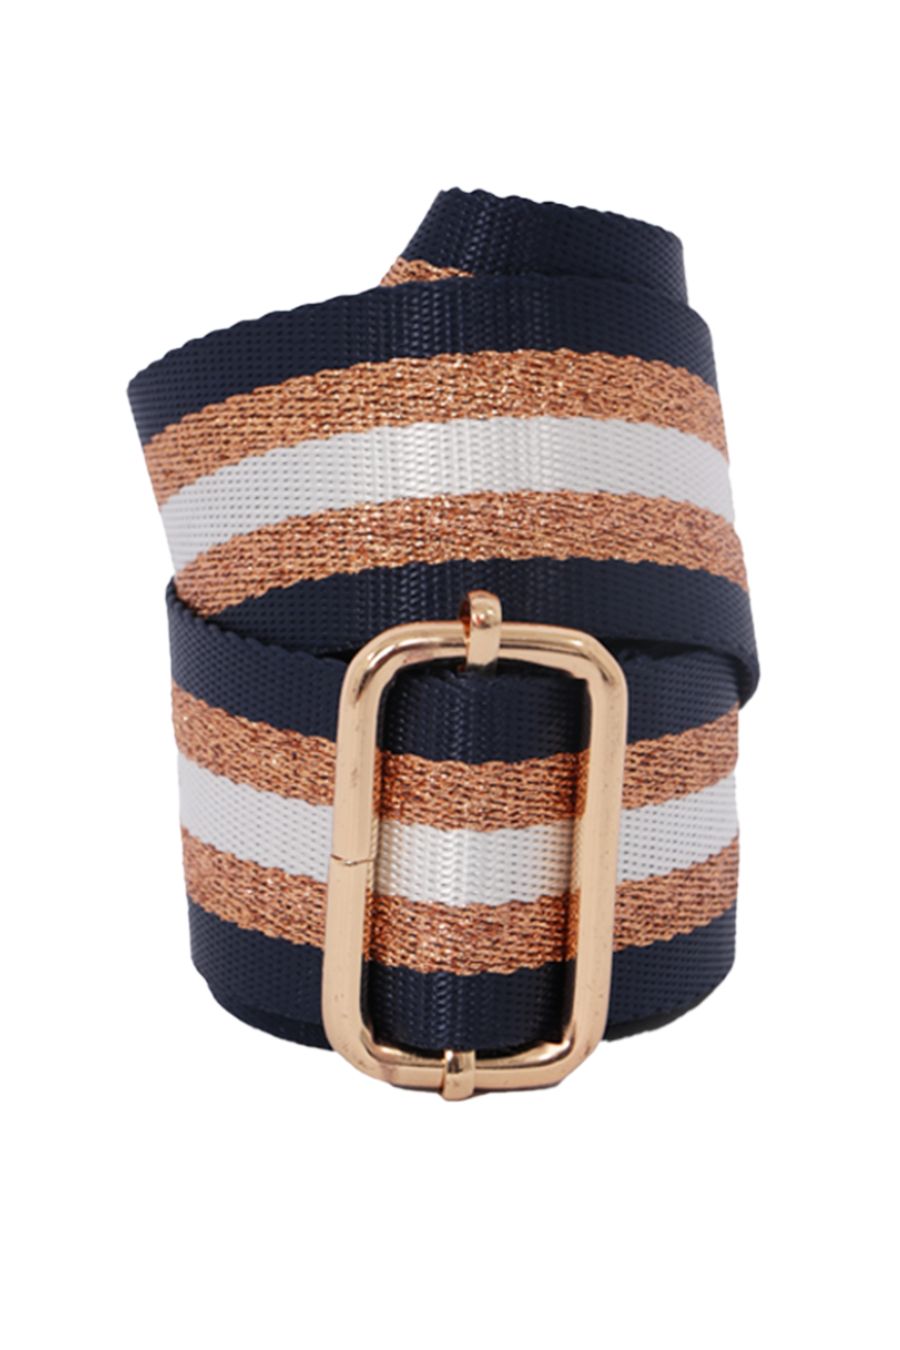 close up of the adjustable gold buckle on the striped crossbody bag strap